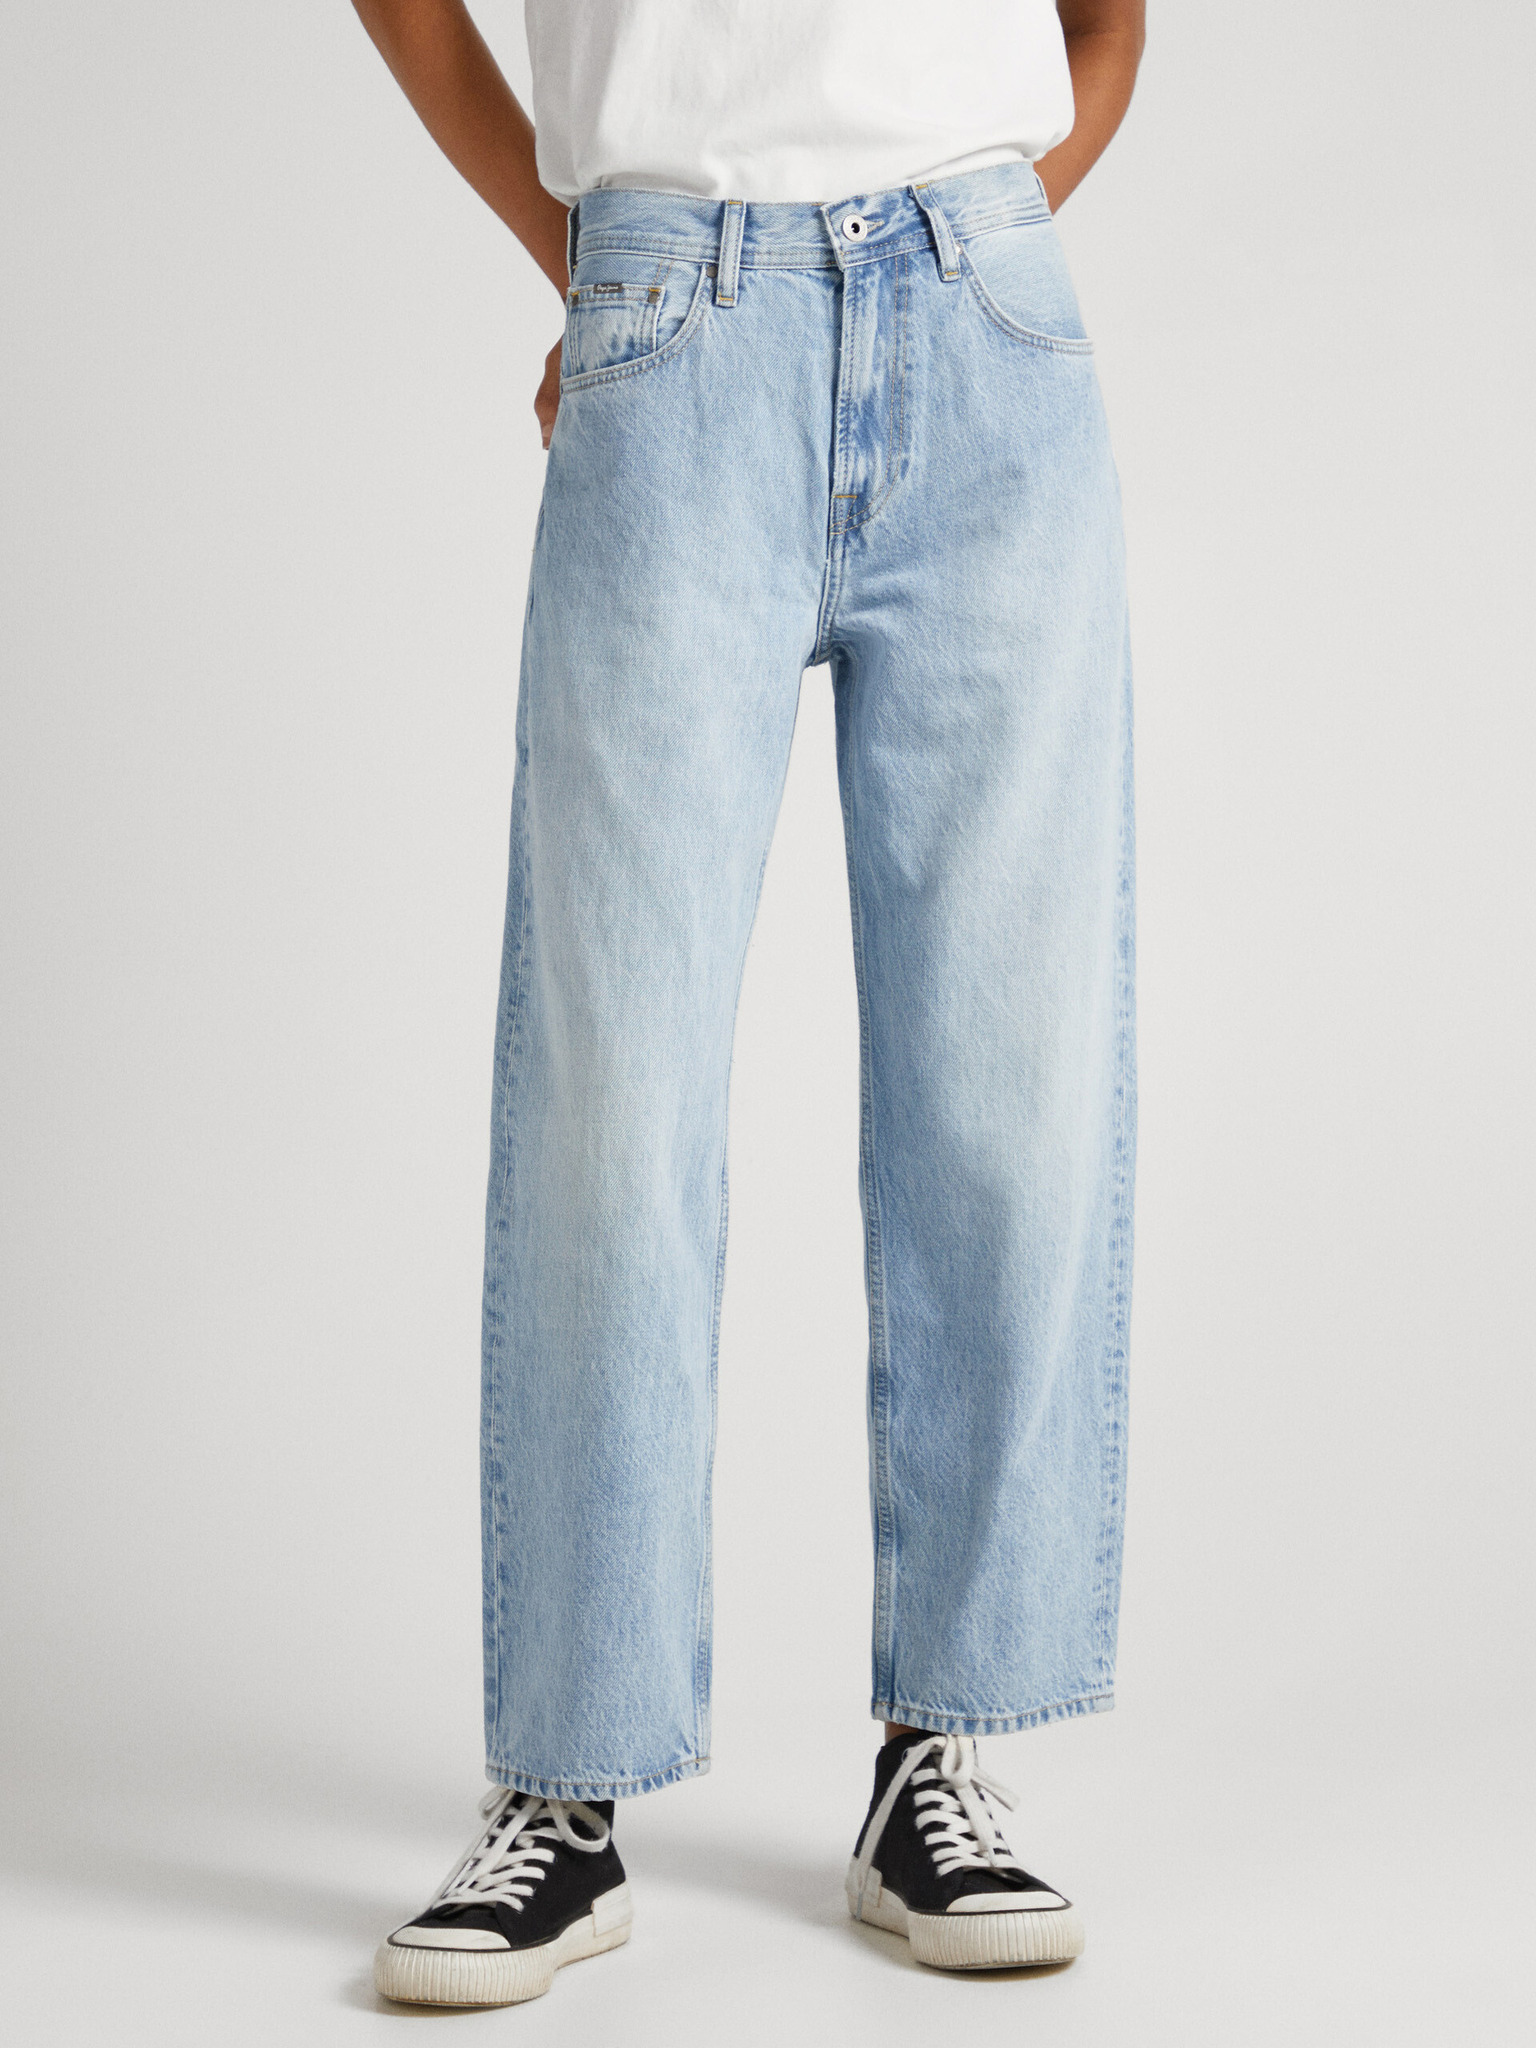 Dover Jeans Pepe Jeans